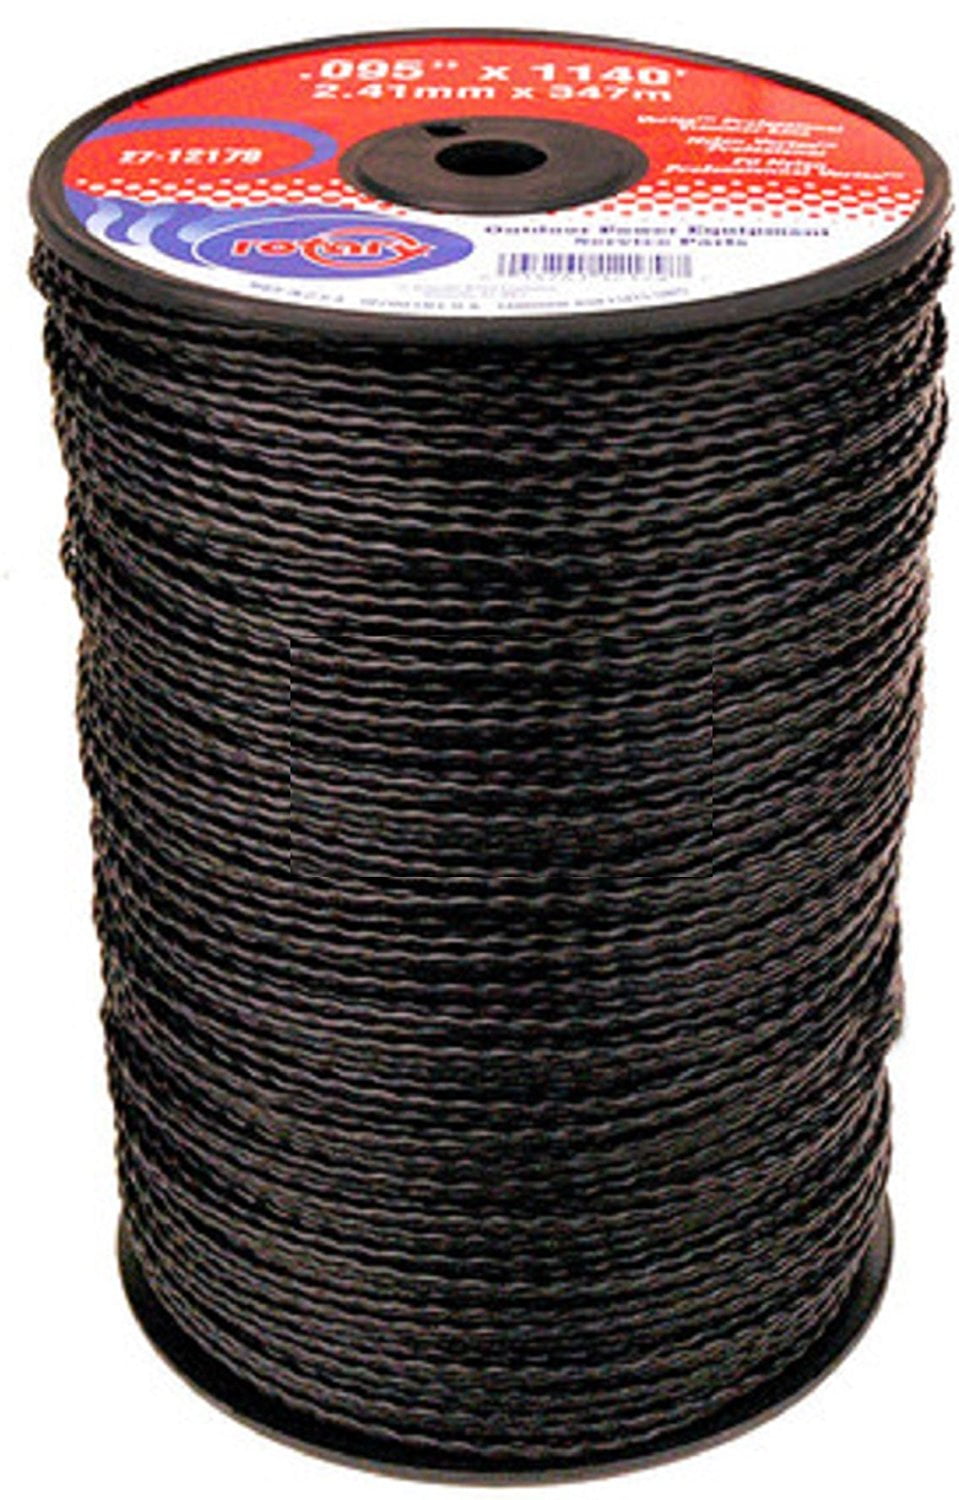 Details about   HD .155 X 85' OEM Spiral Vortex Black Weed Trimmer String CORD 1 LB USA MADE 